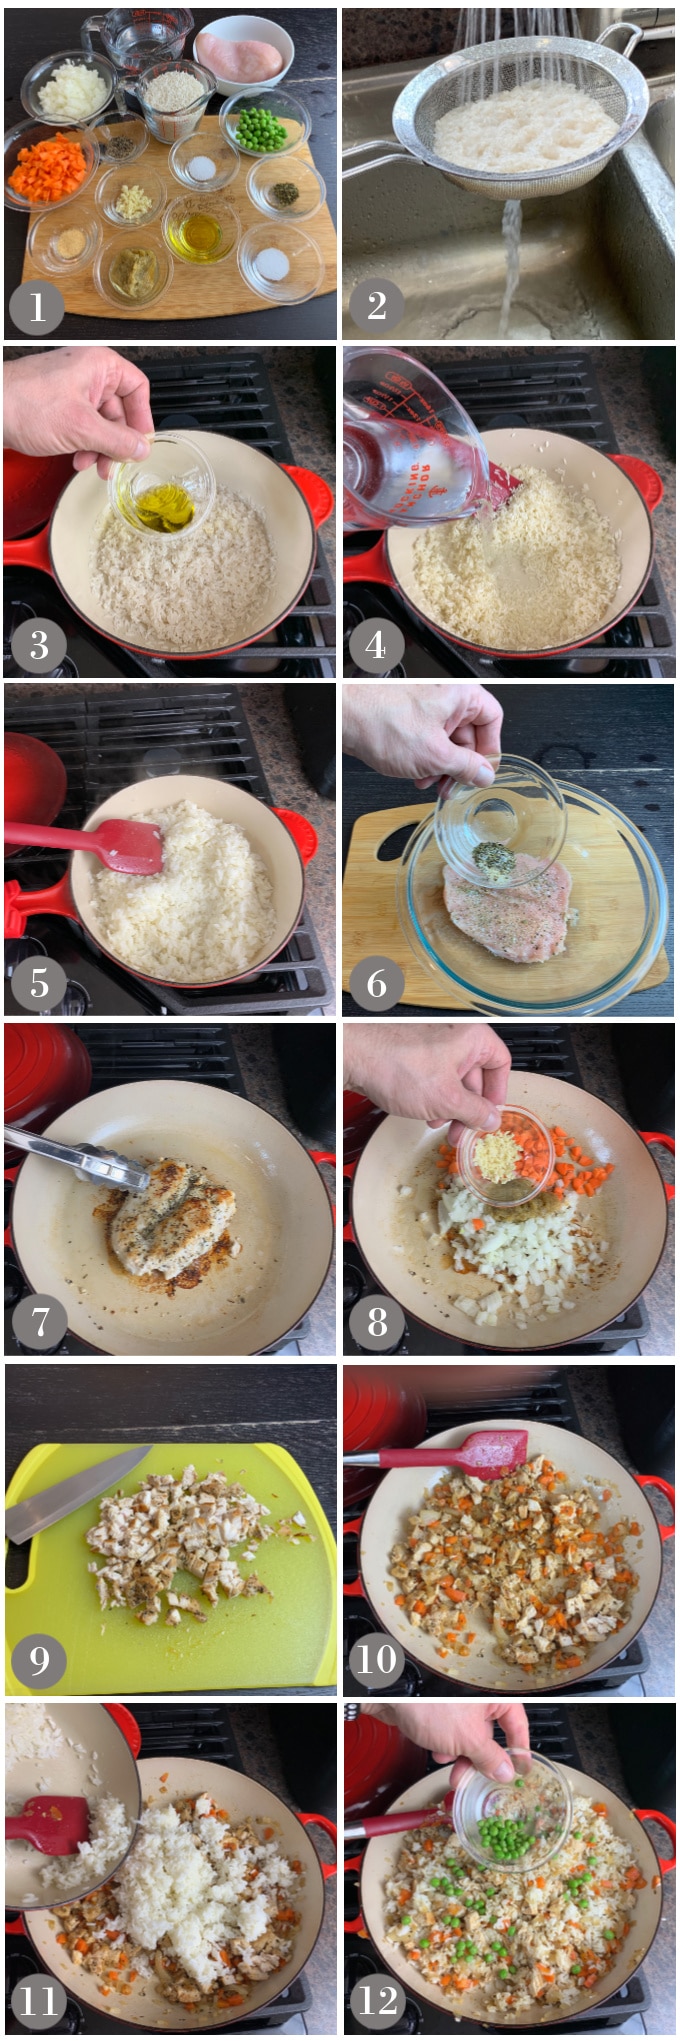 A collage of photos showing the ingredients to make arroz con pollo in a pan on the stove.